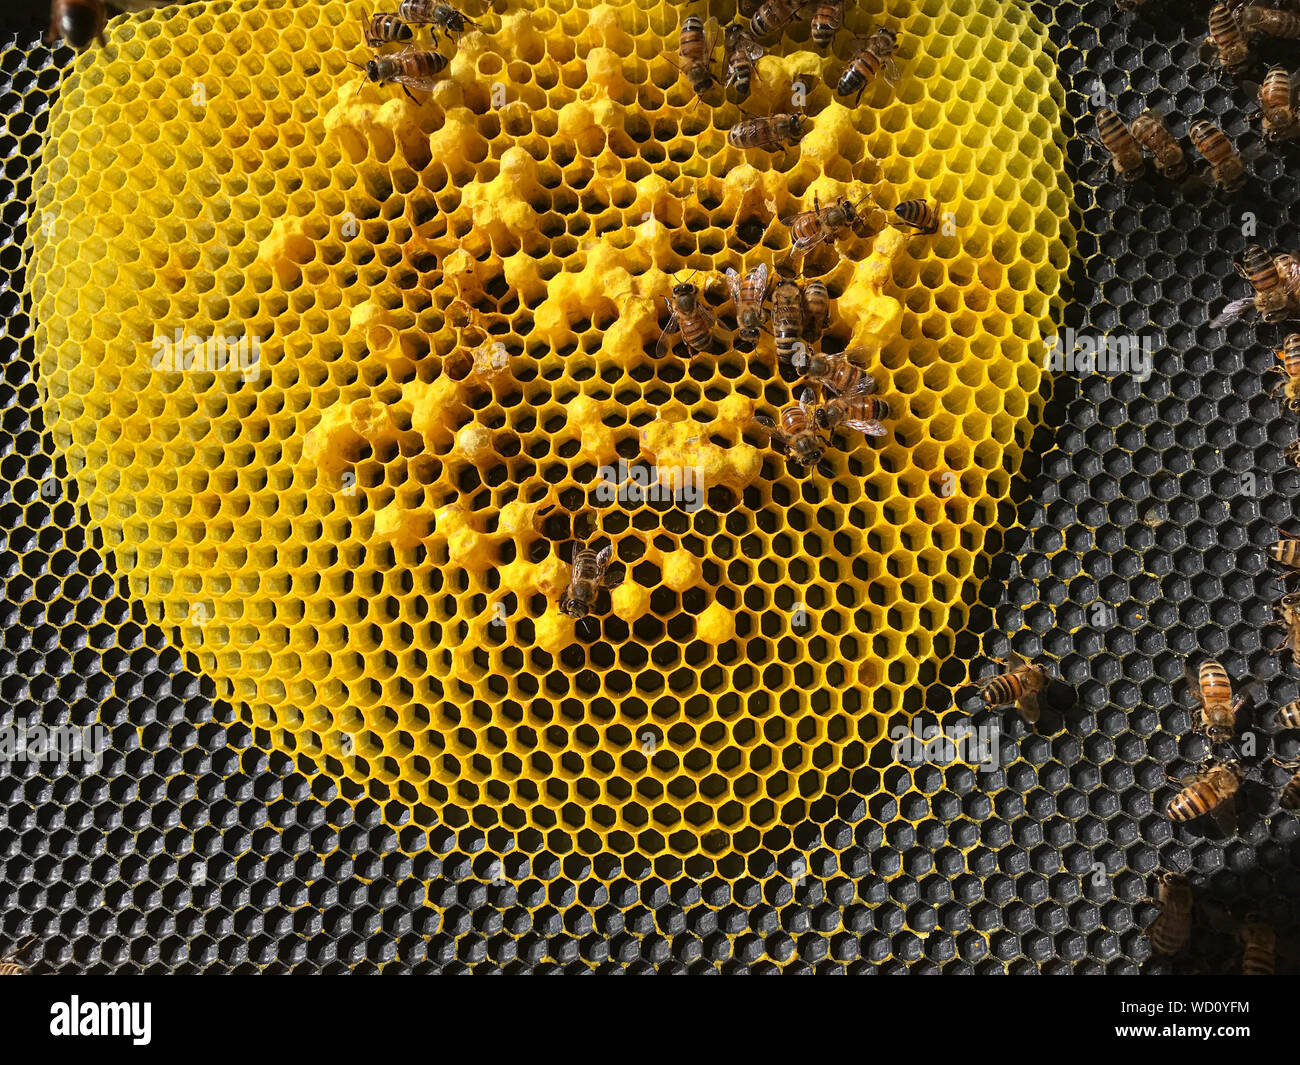 Multiple eggs per chamber in a failing hive. Stock Photo